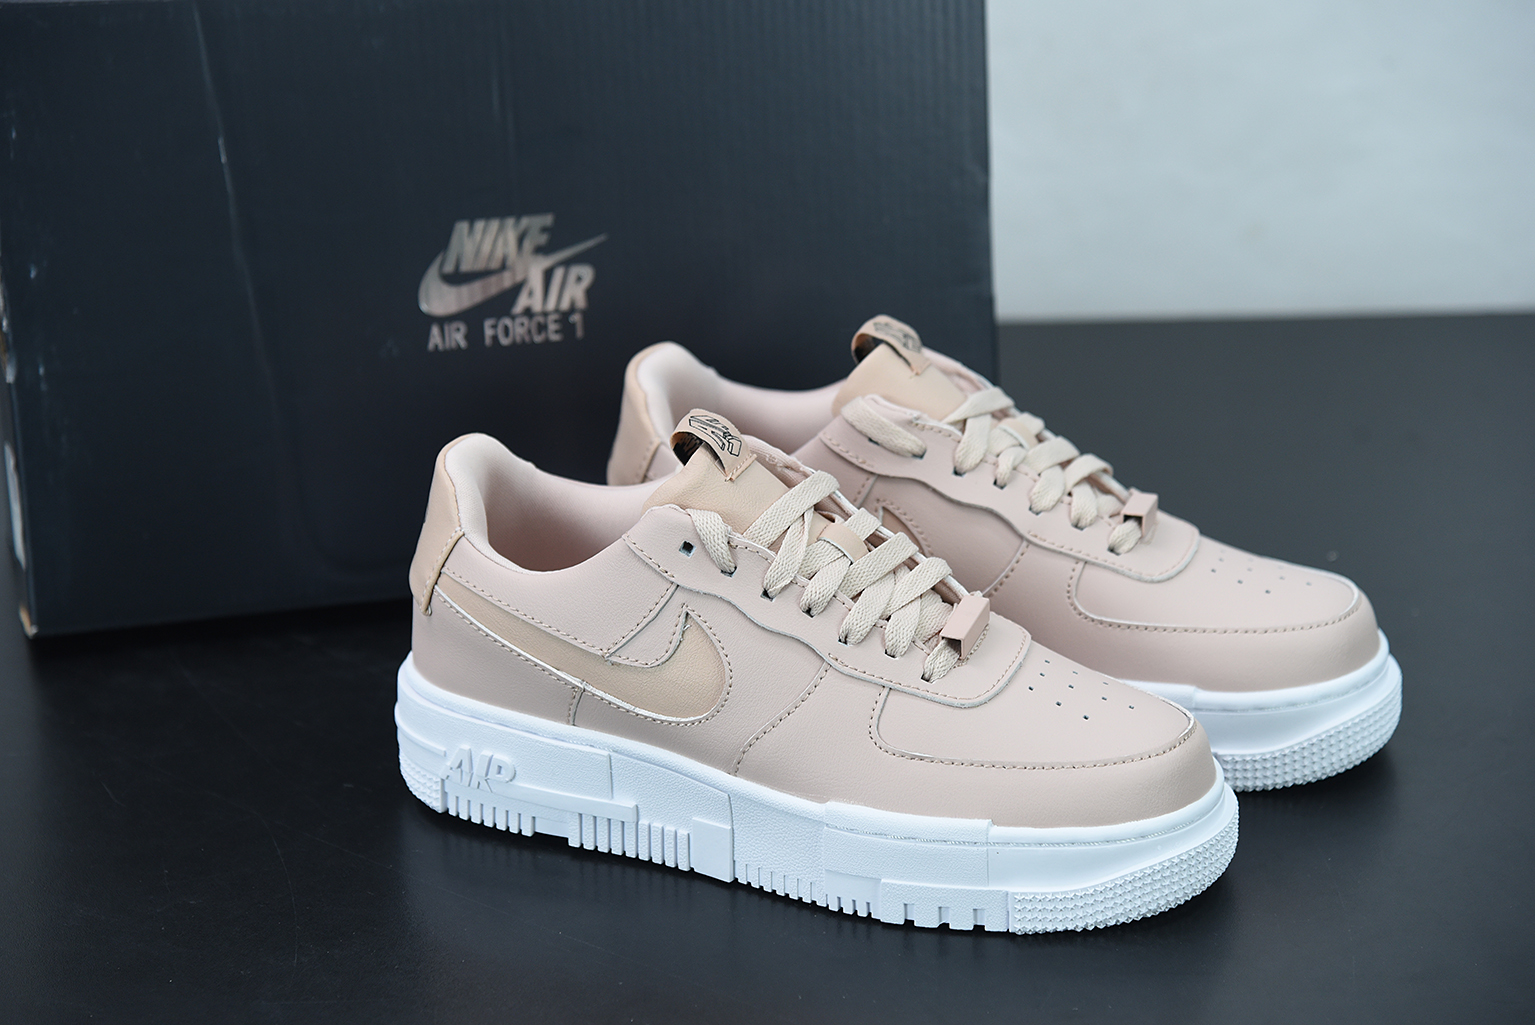 Afleiding beschaving pindas Nike Air Force 1 Pixel Particle Beige/Black/White CK6649-200 For Sale – Fit  Sporting Goods